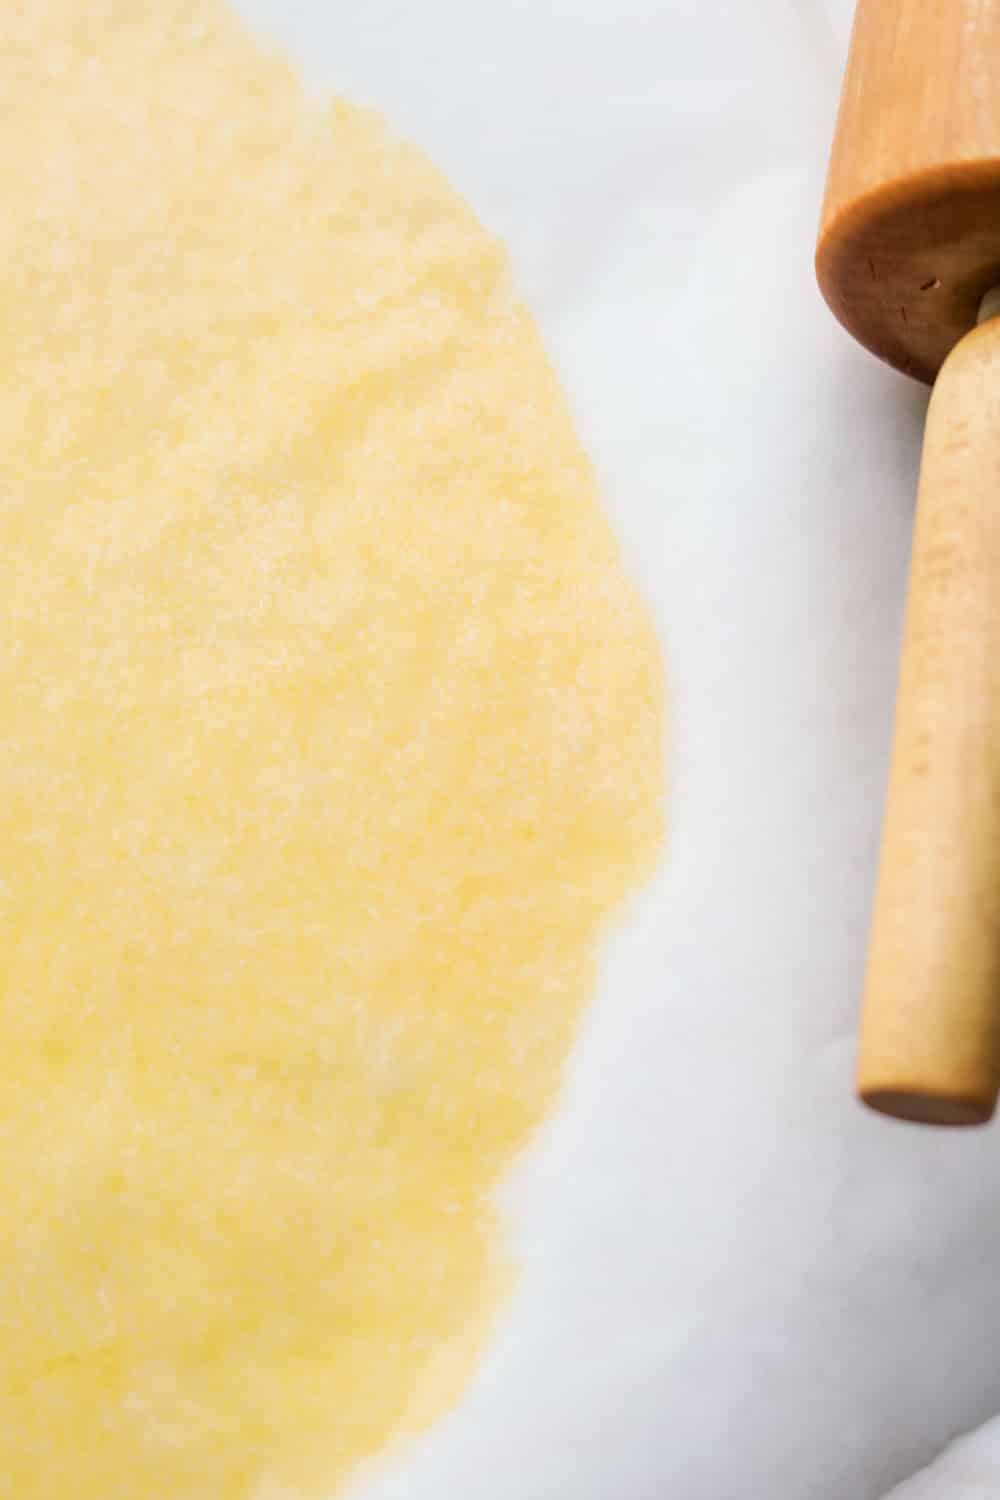 Pasta dough that's been rolled out between two sheets of parchment paper.